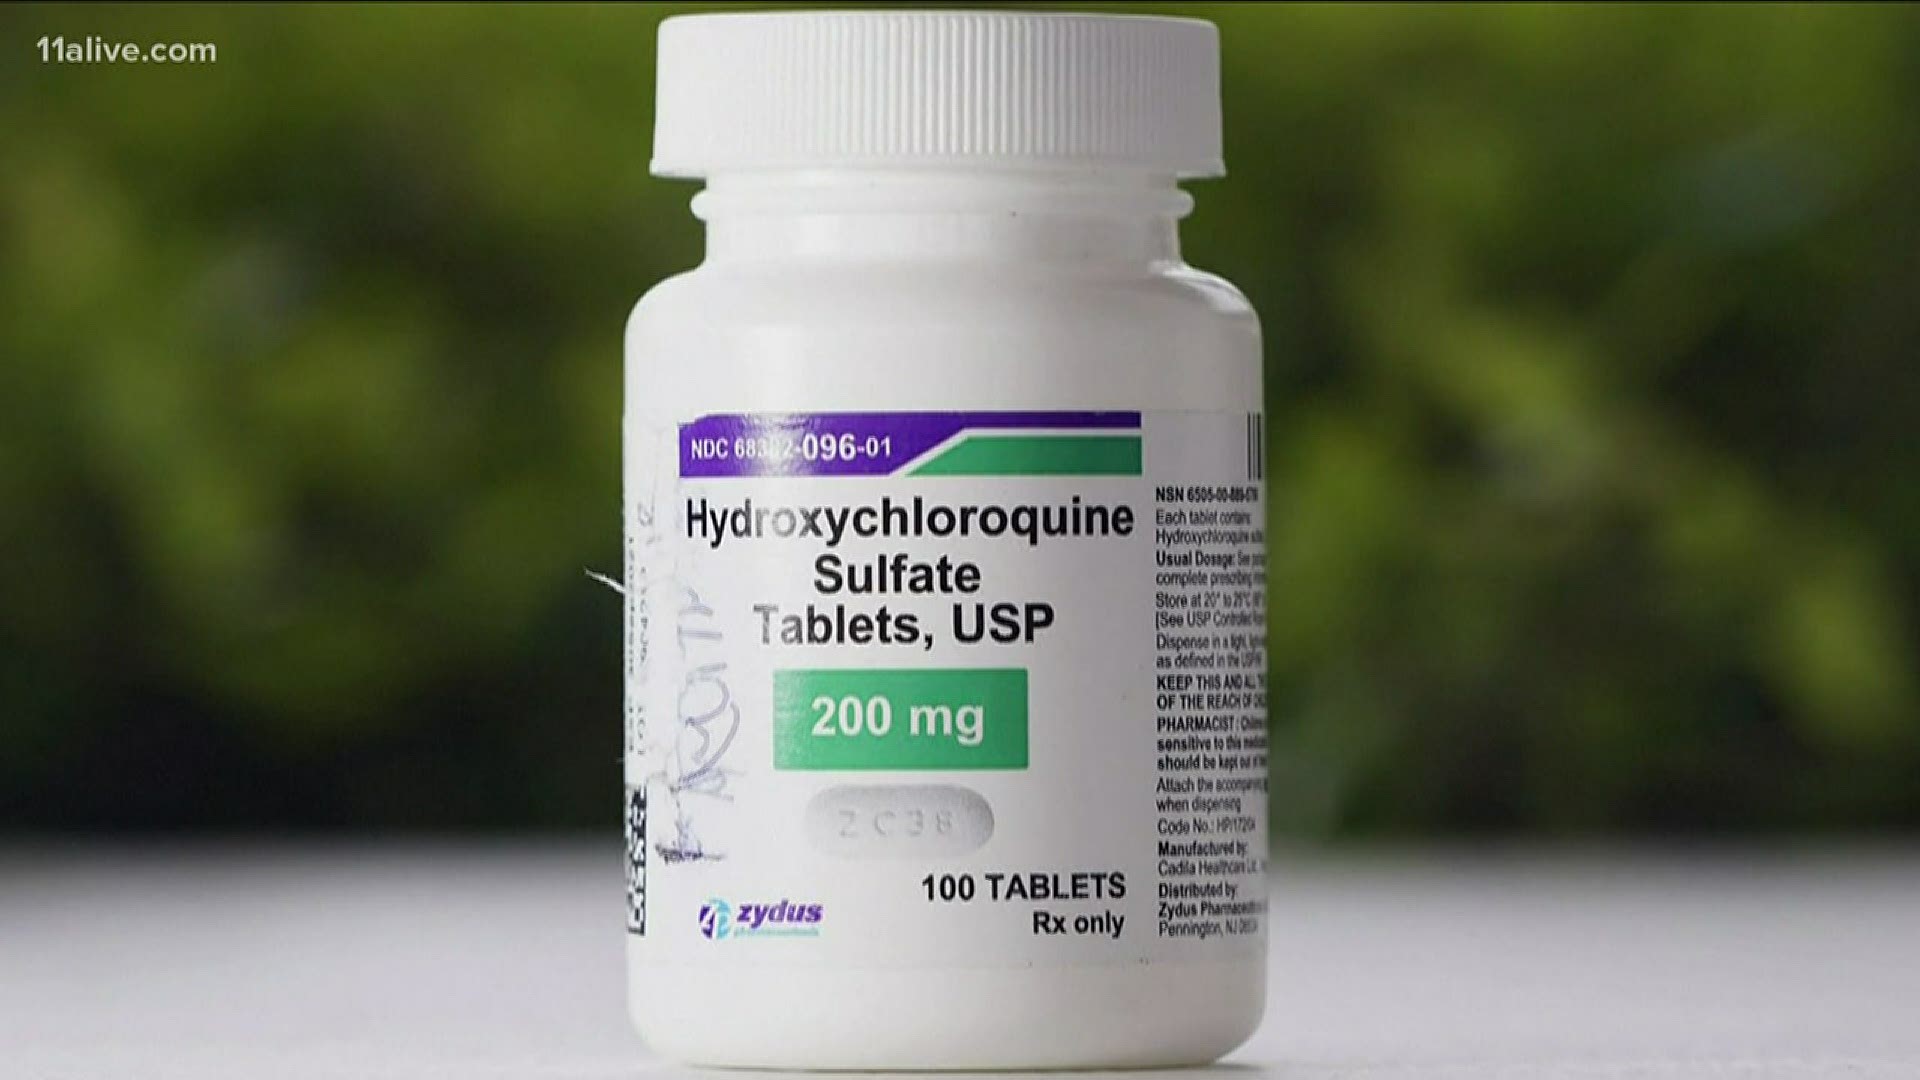 Hydroxychloroquine began as a treatment for malaria and is also used widely to treat lupus and arthritis.